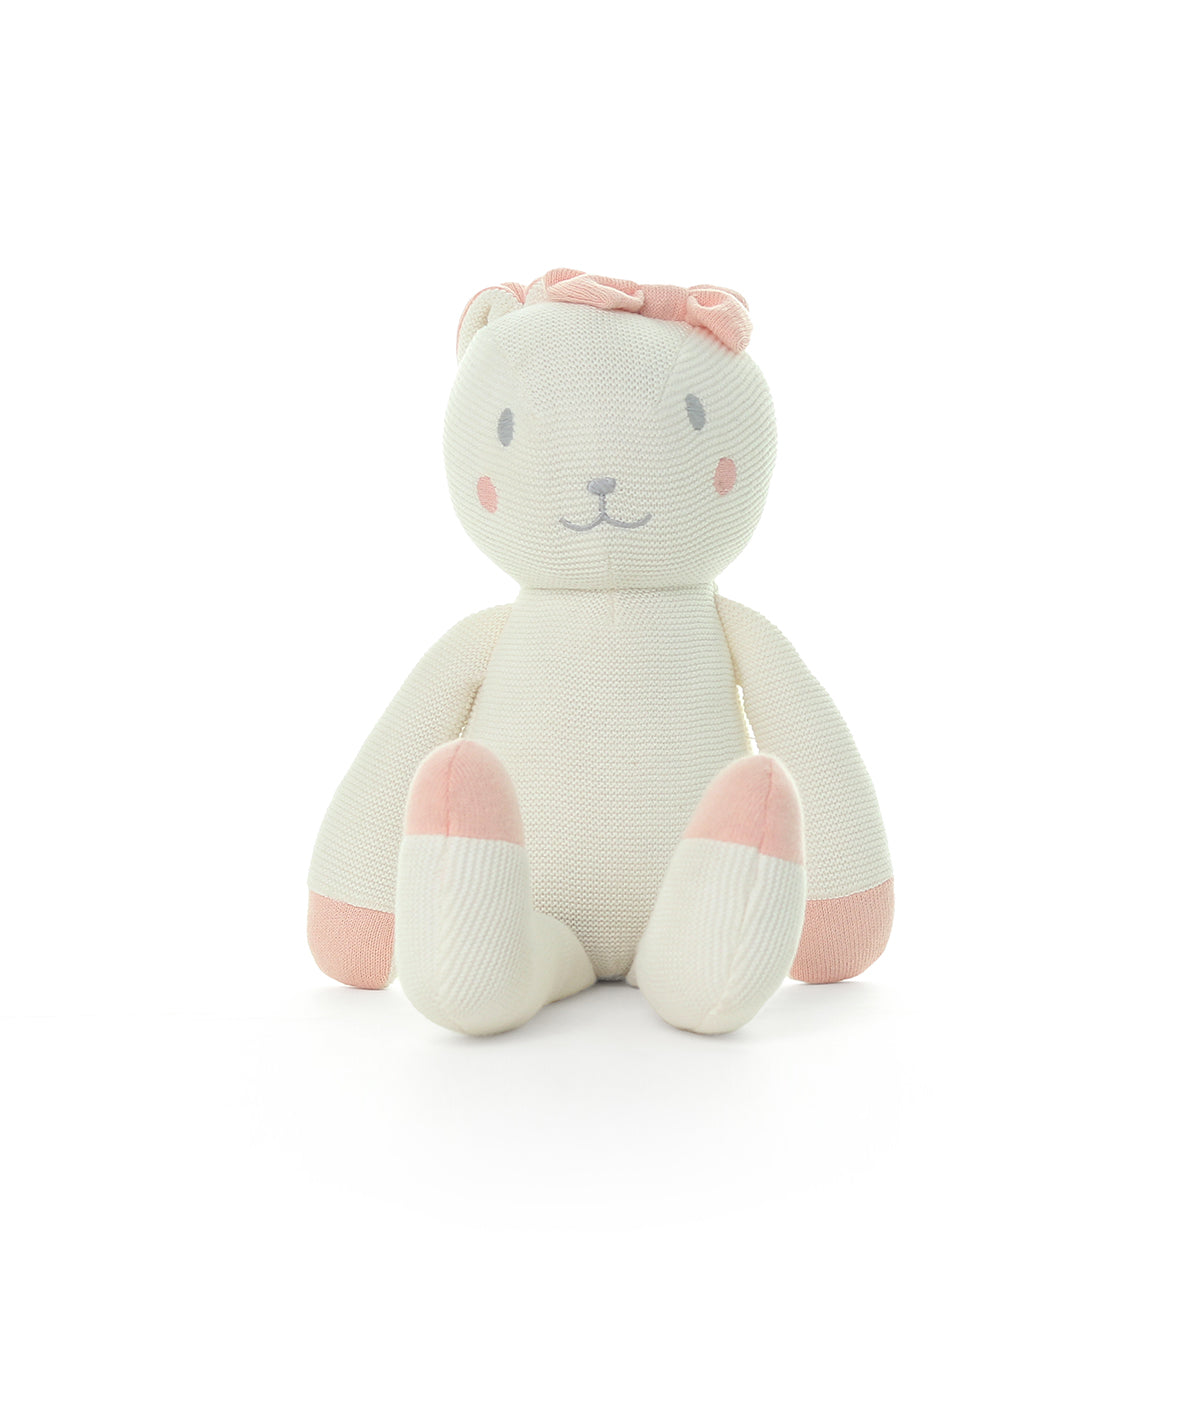 Berry Bunny Cotton Knitted Stuffed Soft Toy (Ivory & Baby Pink)